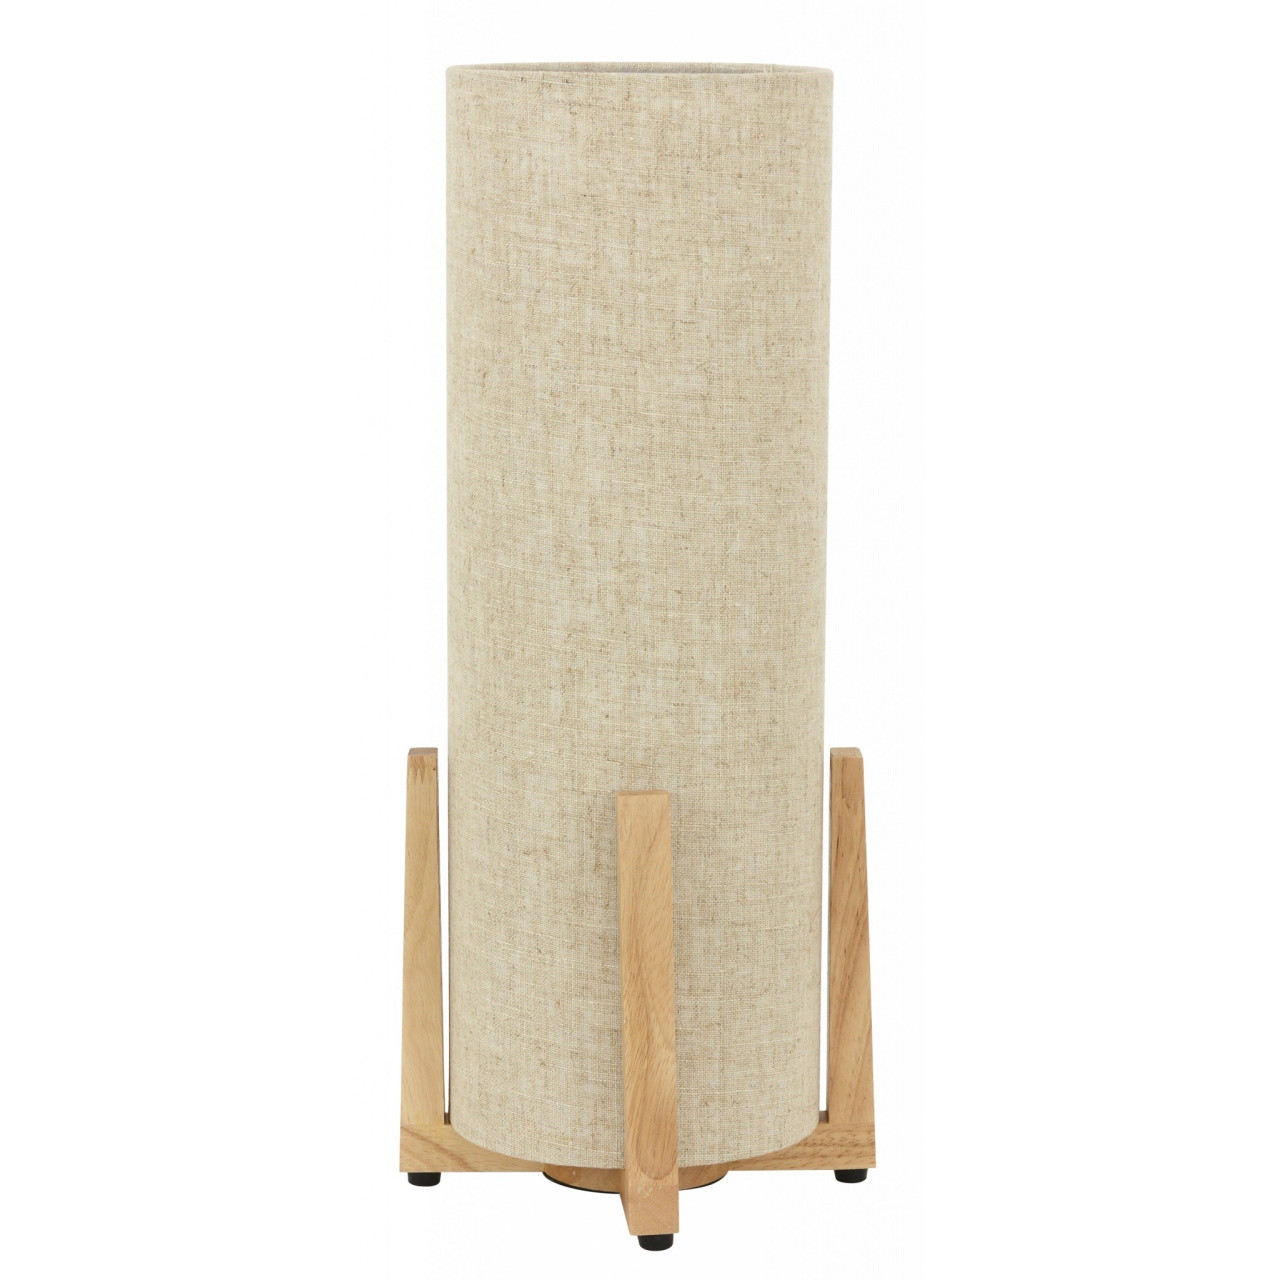 Wooden table lamp with natural shade